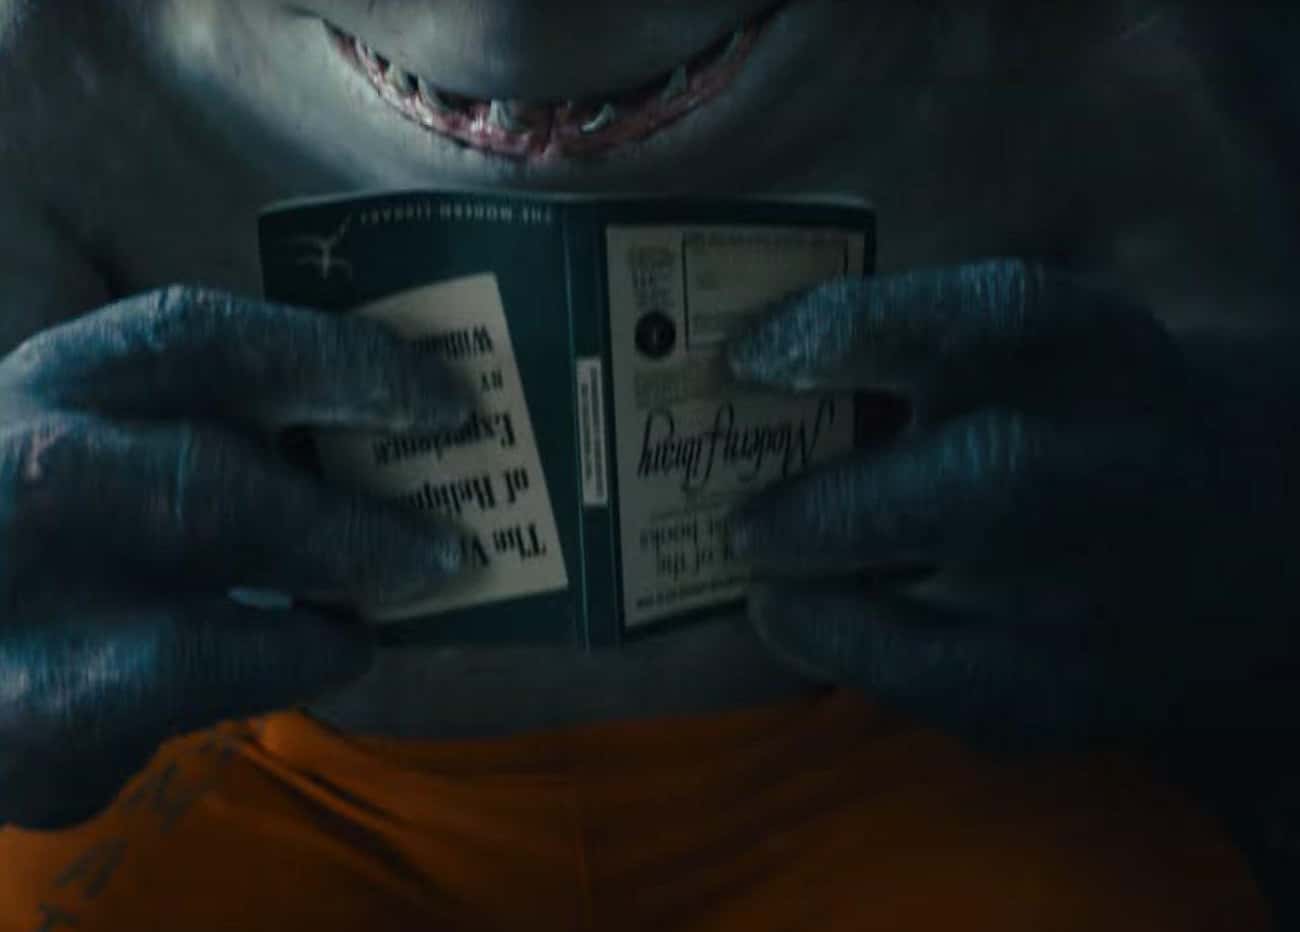 King Shark Is Shown Reading 'The Varieties of Religious Experience' By William James, Which Alludes To His Status As A Demigod